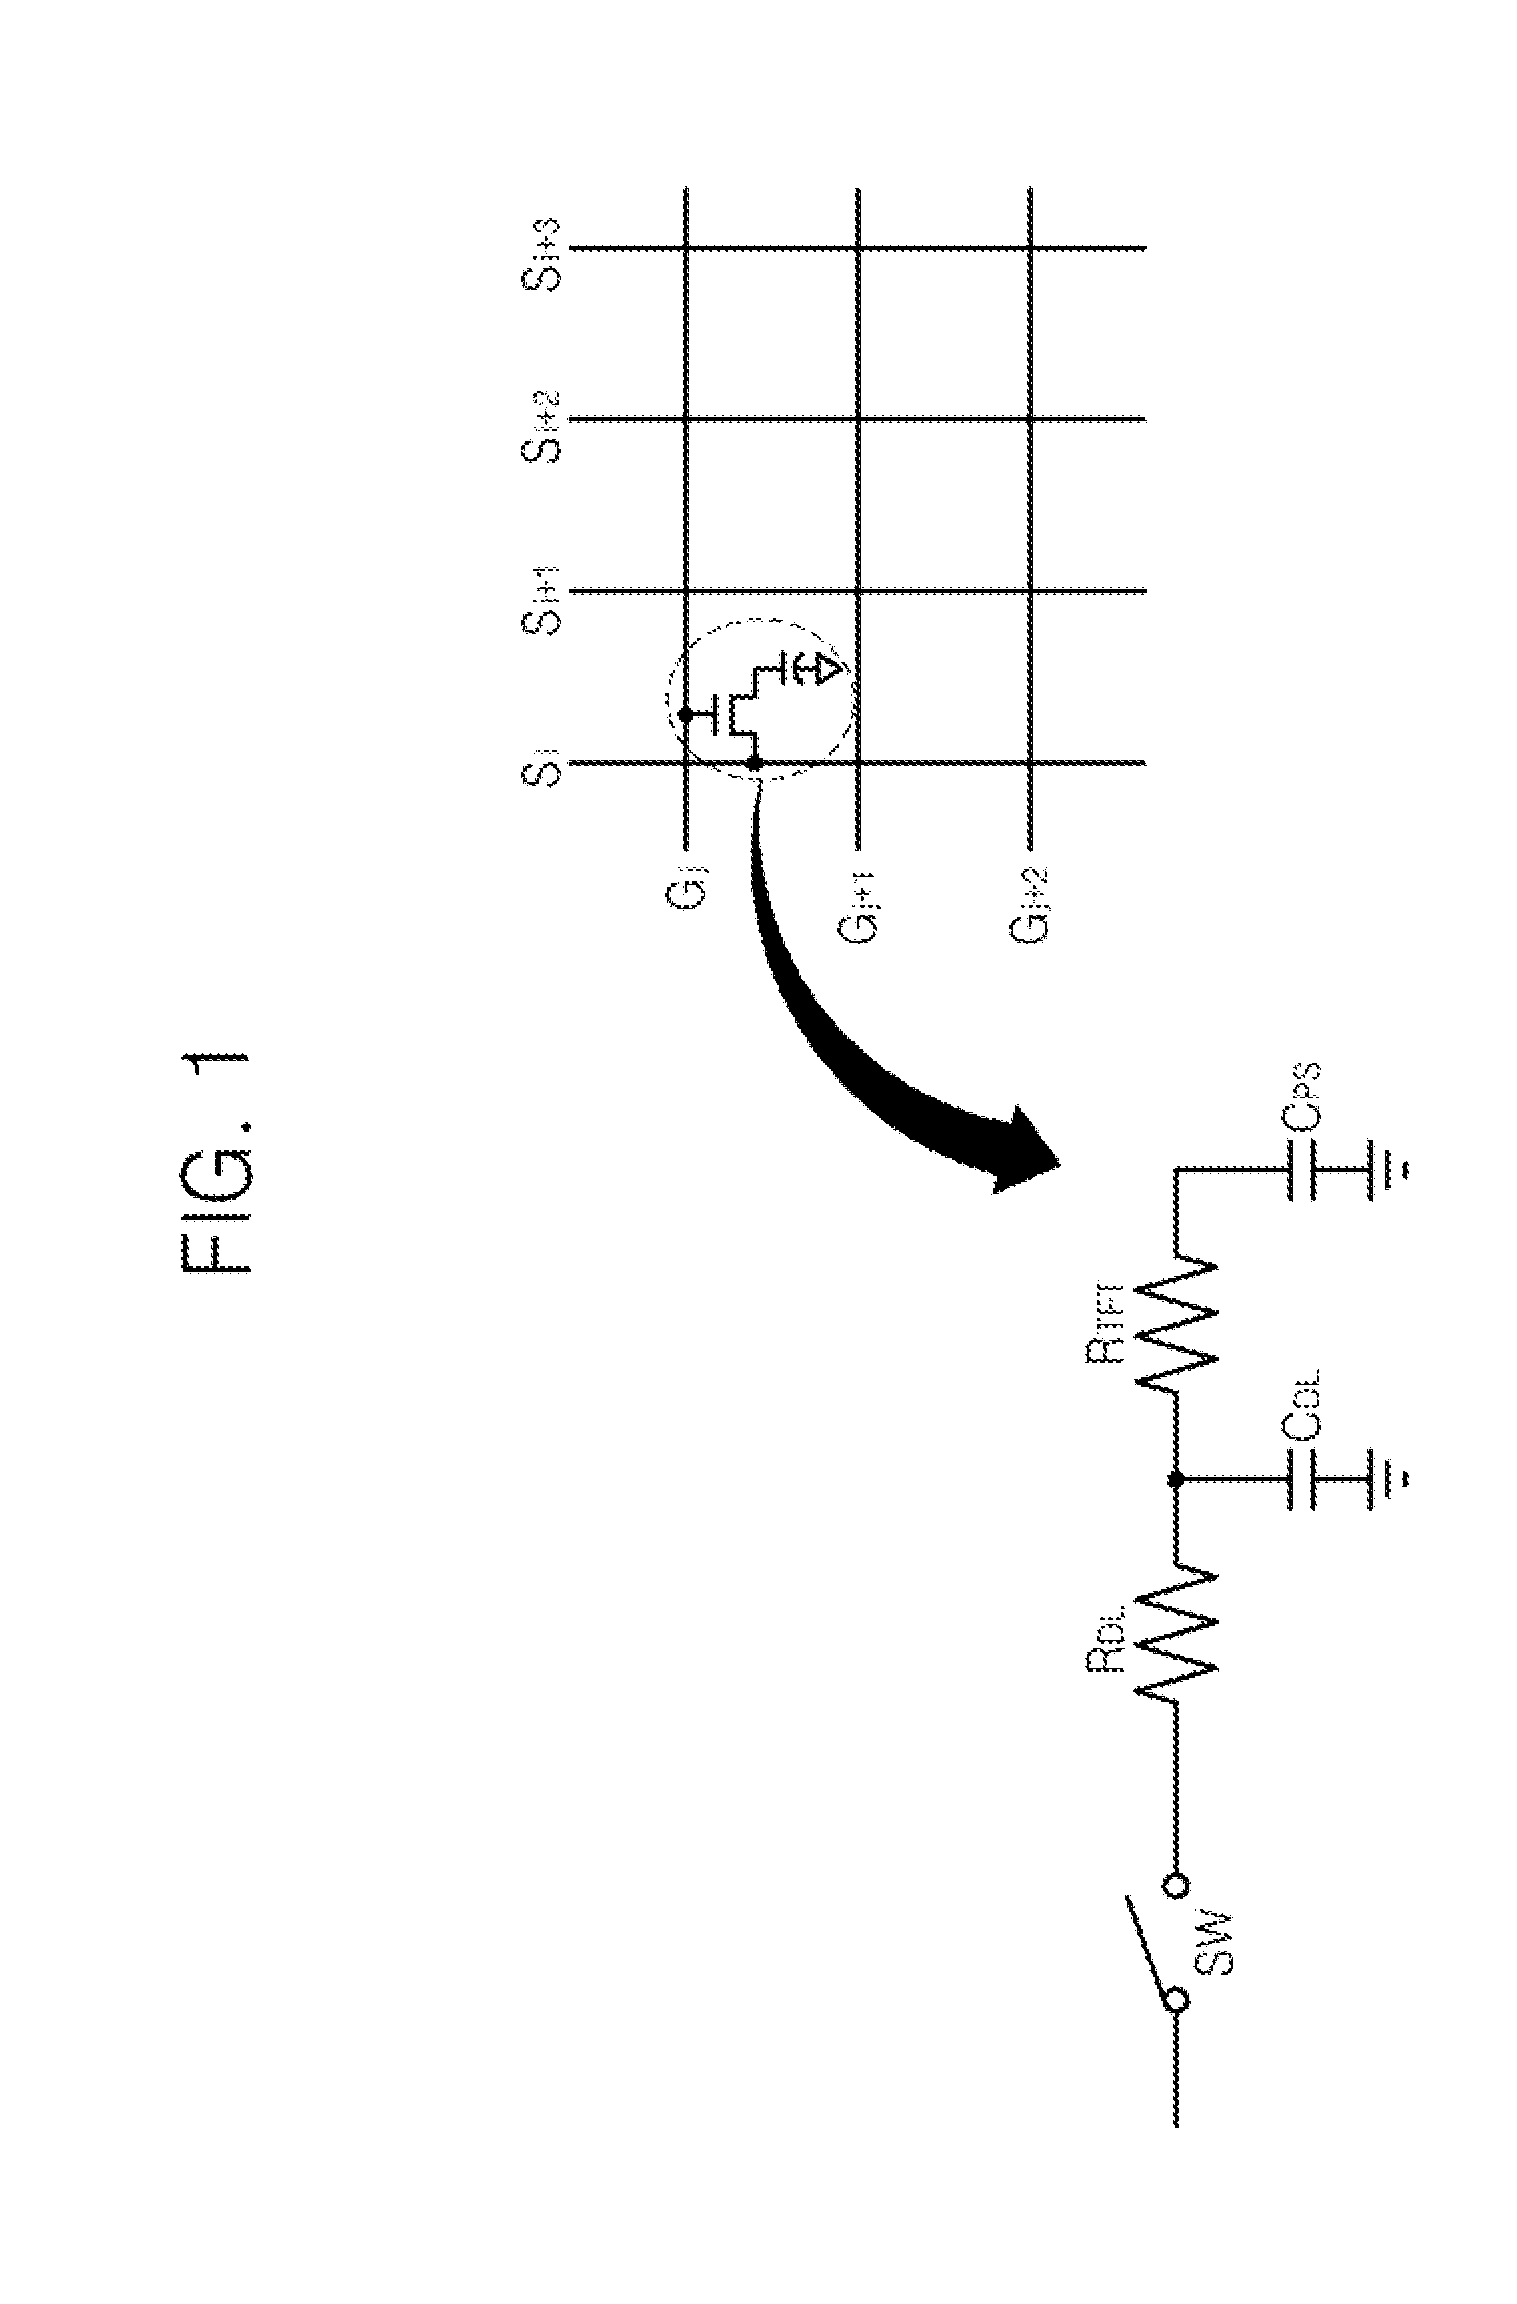 Source Driver and Display Device Having the Same